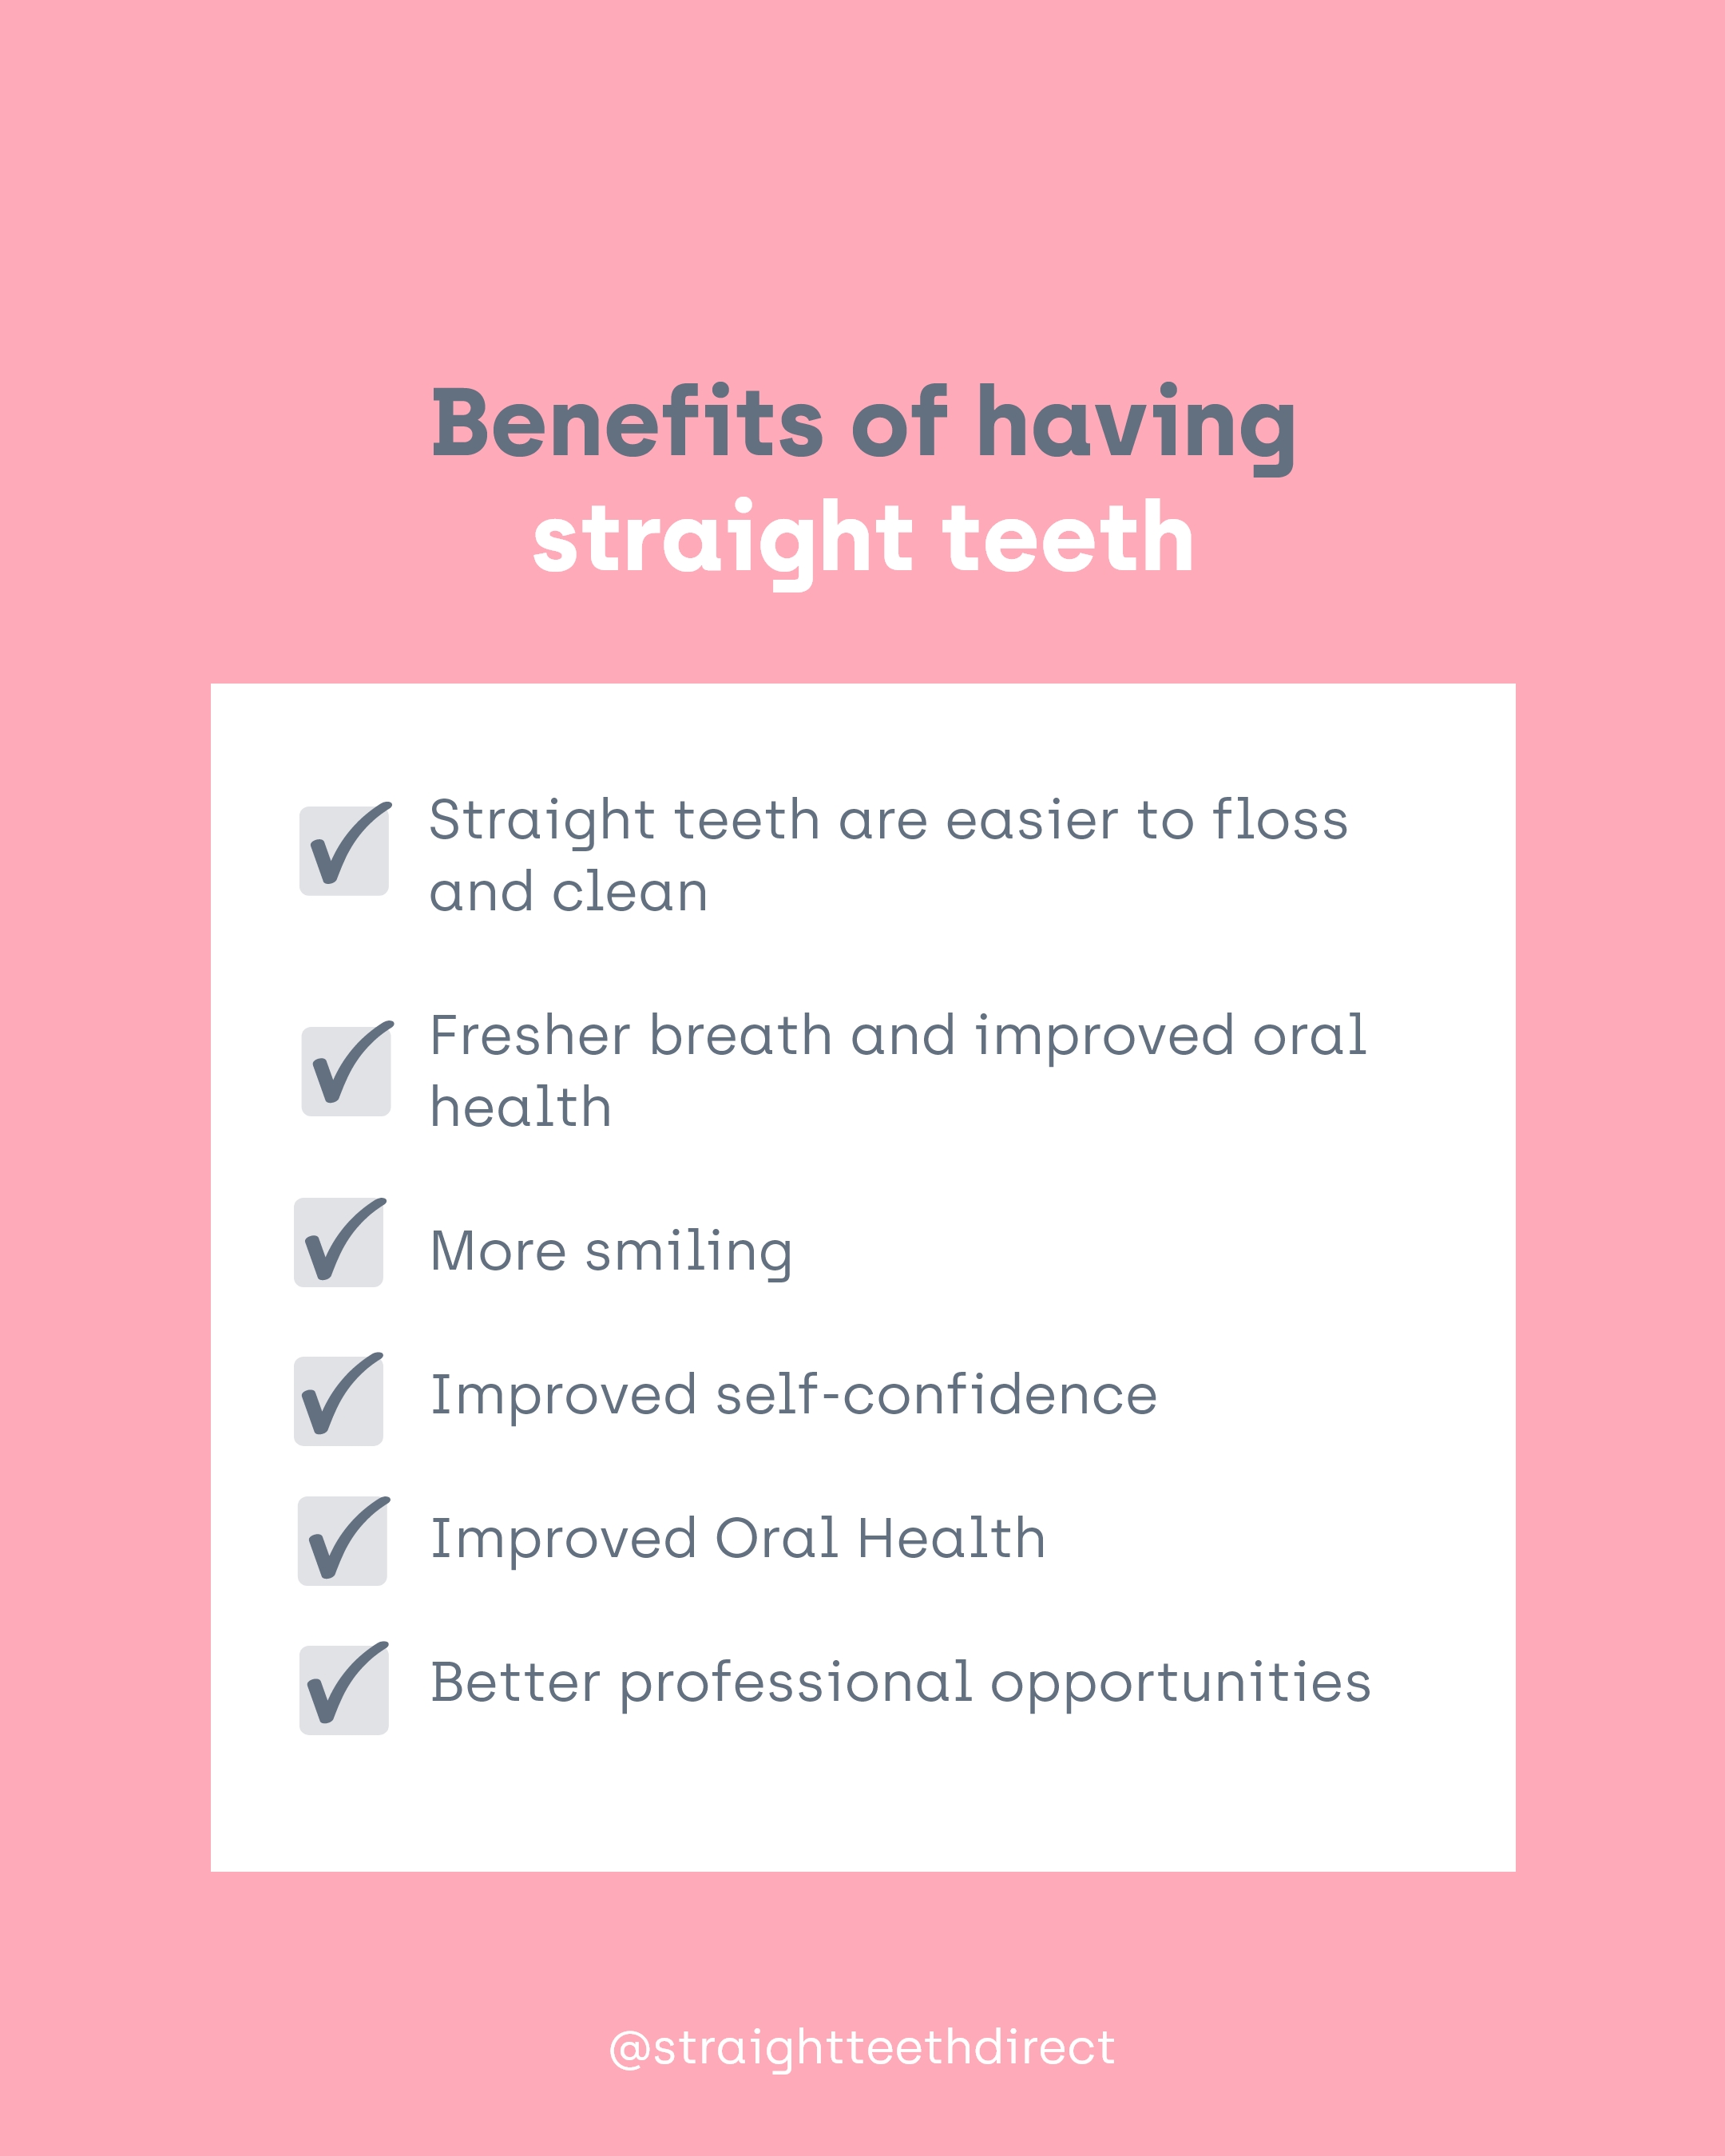 Table with the benefits of having straight teeth